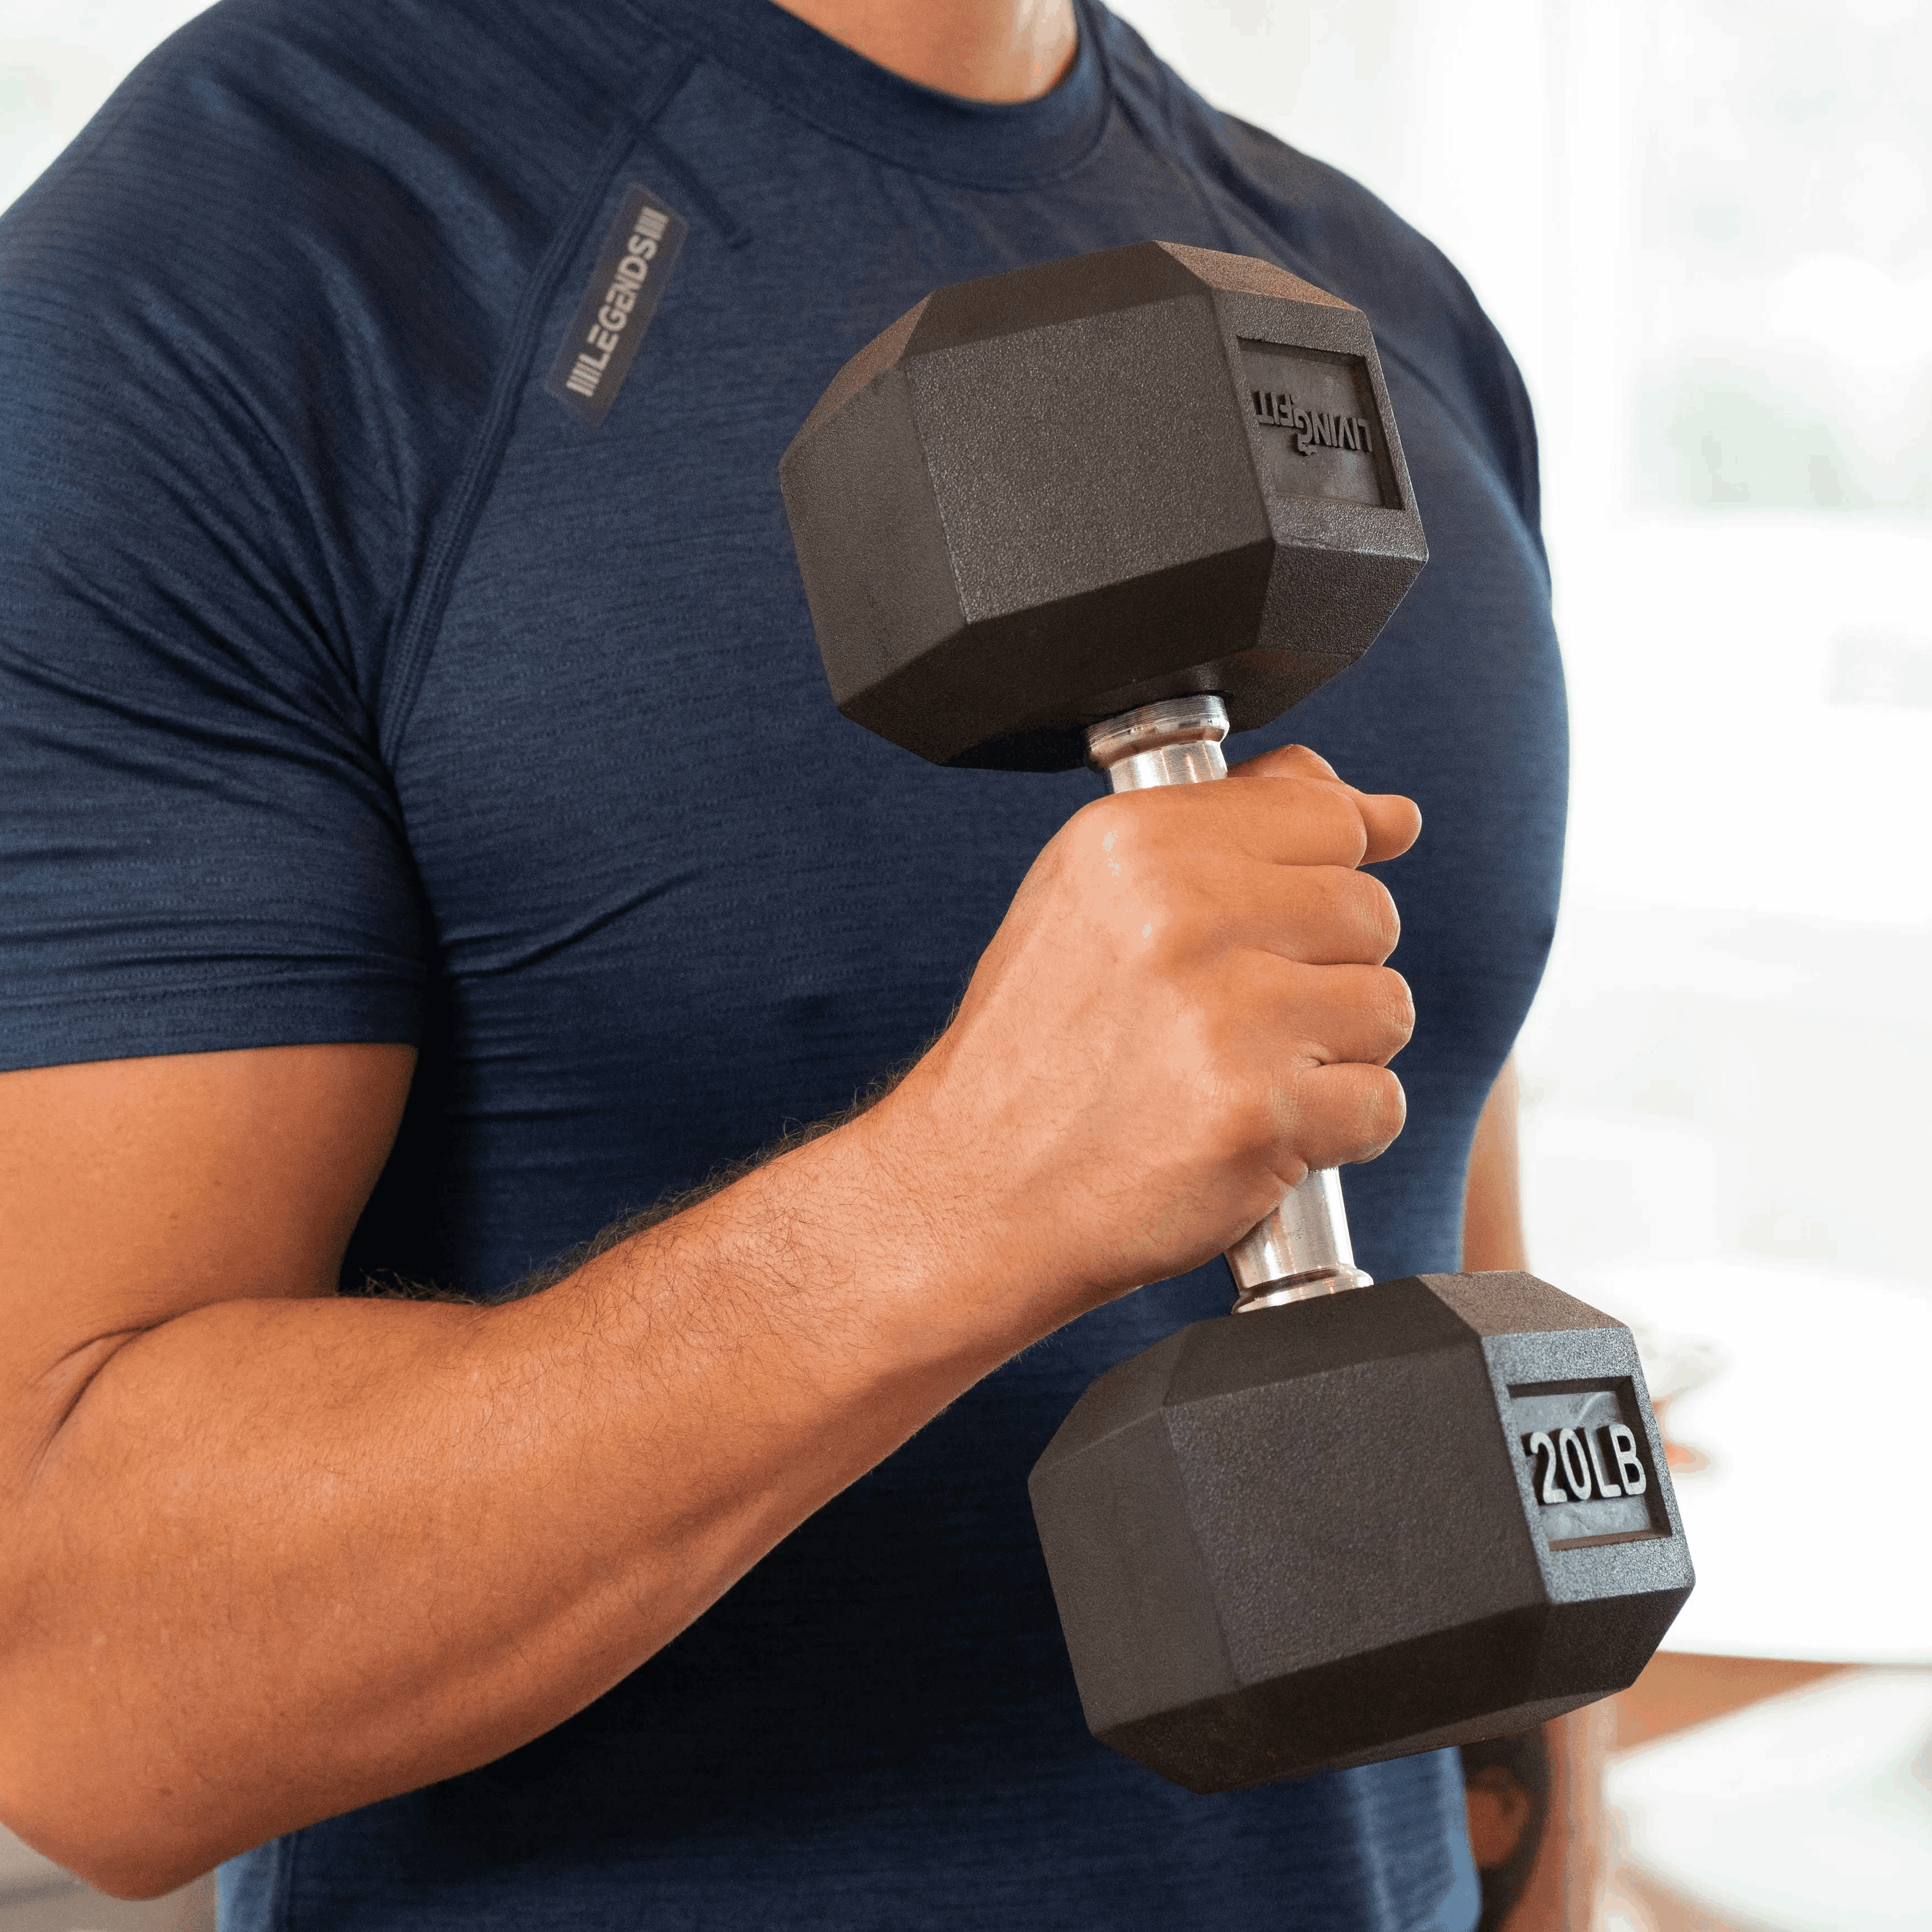 Why You Should Add Hex Dumbbells to Your Home Gym, According to a Fitness Expert